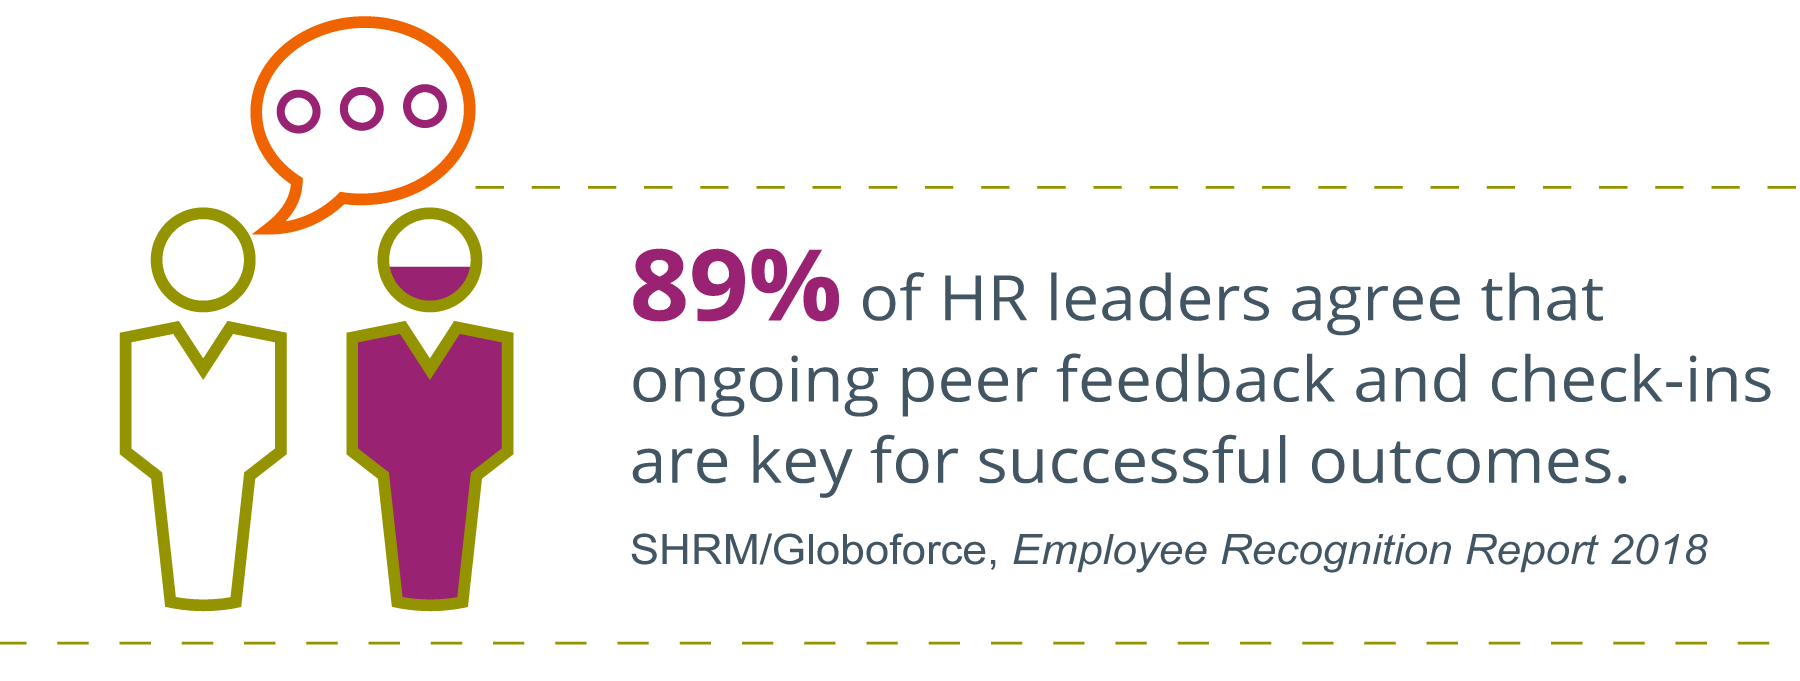 two people icons, one with a conversation bubble coming from their head, and the other person icon colored in 89% of the way (about halfway through their head), written to the right: 89% of HR leaders agree that ongoing peer feedback and check-ins are key for successful outcomes. Source: SHRM/Globoforce Employee Recognition Report 2018